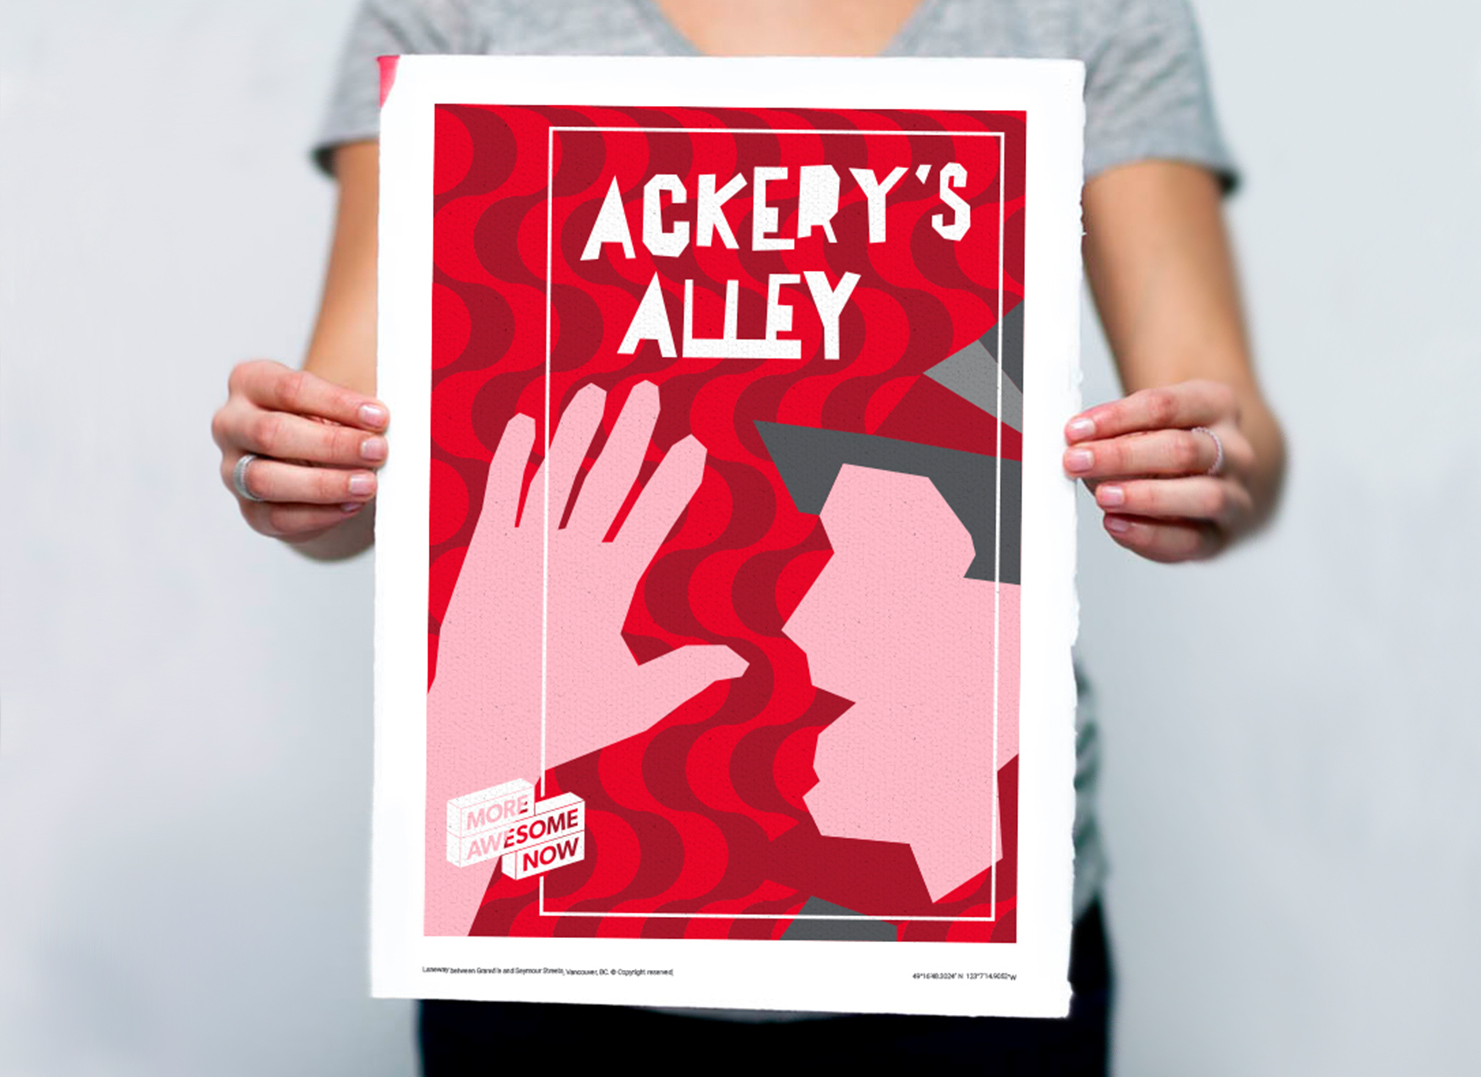 Someone holding a cut-out illustration for Ackery's Alley.